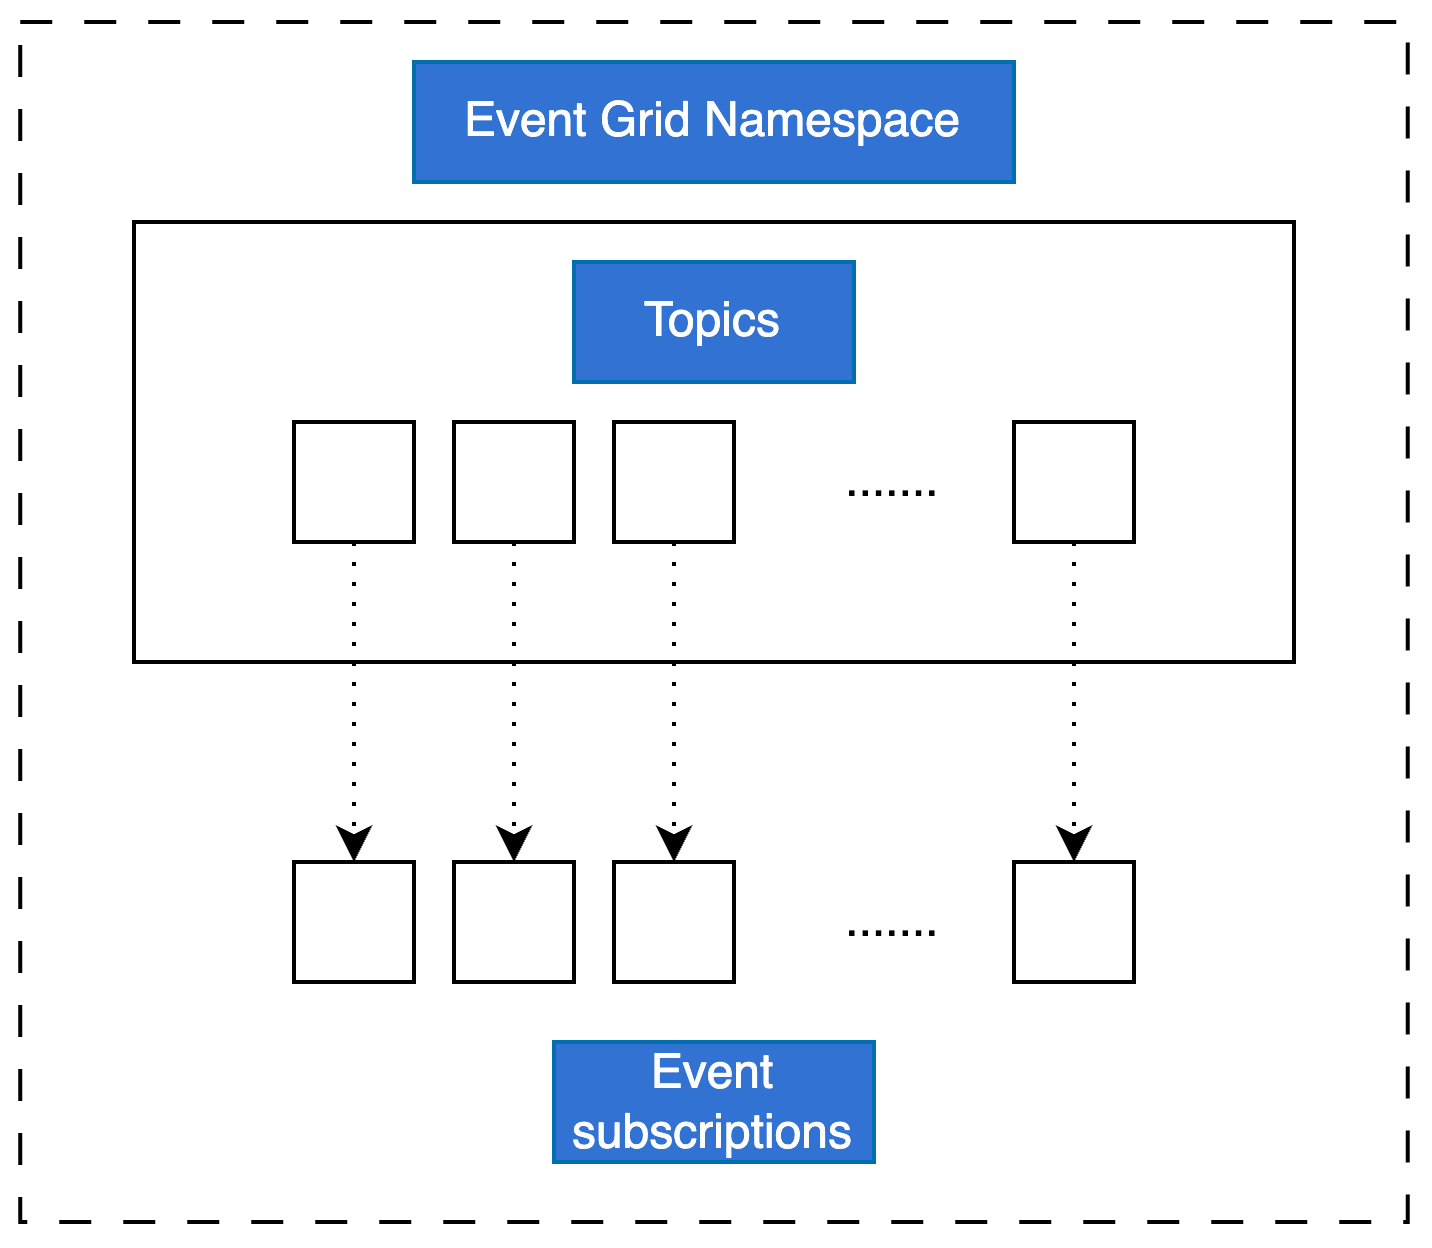 Azure Event Grid Namespace: An Introductory Guide